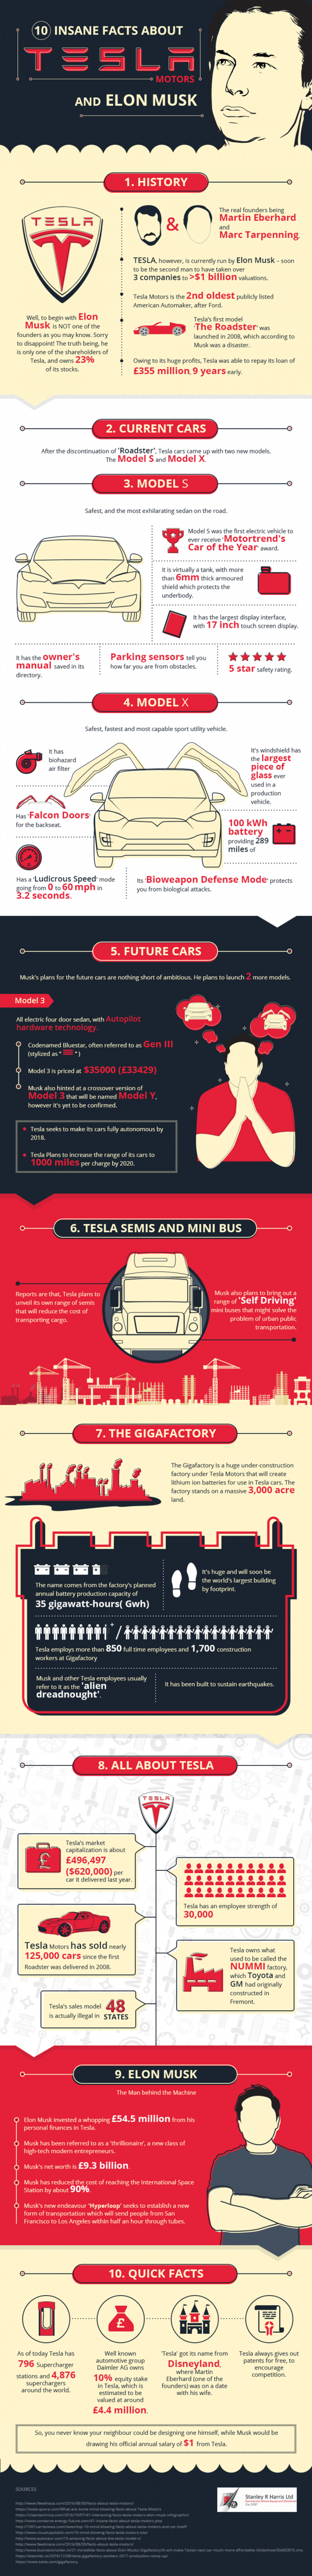 10 Insane facts about Tesla Motors and Elon Musk - Infographic